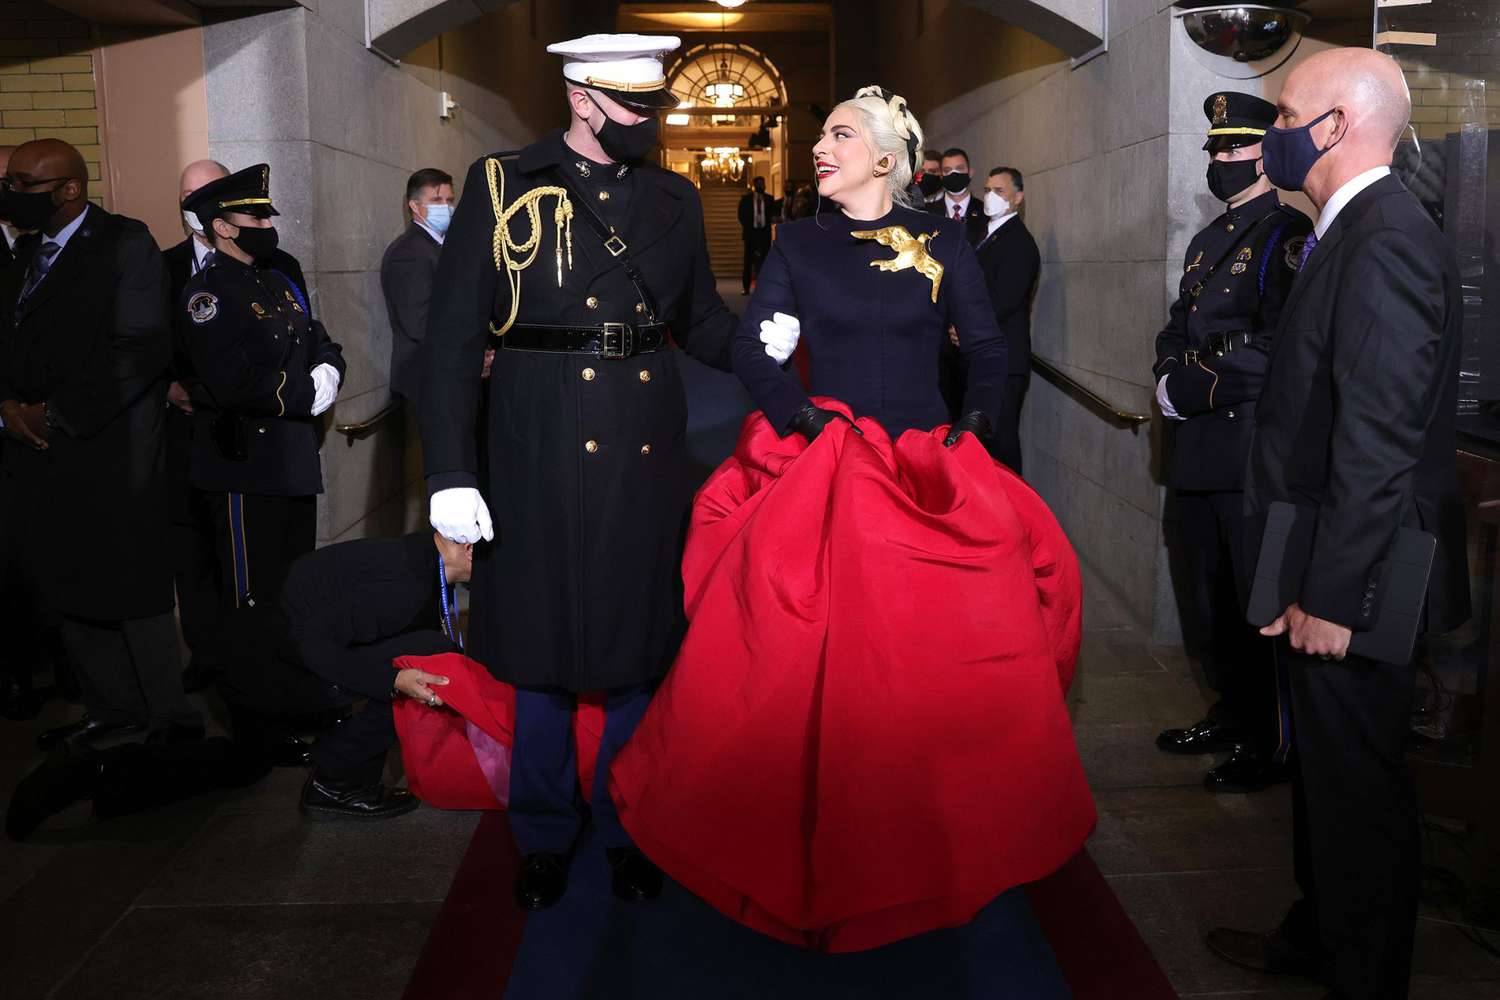 Lady Gaga sings the National Anthem at the inauguration of U.S. President-elect Joe Biden on the West Front of the U.S. Capitol on January 20, 2021 in Washington, DC